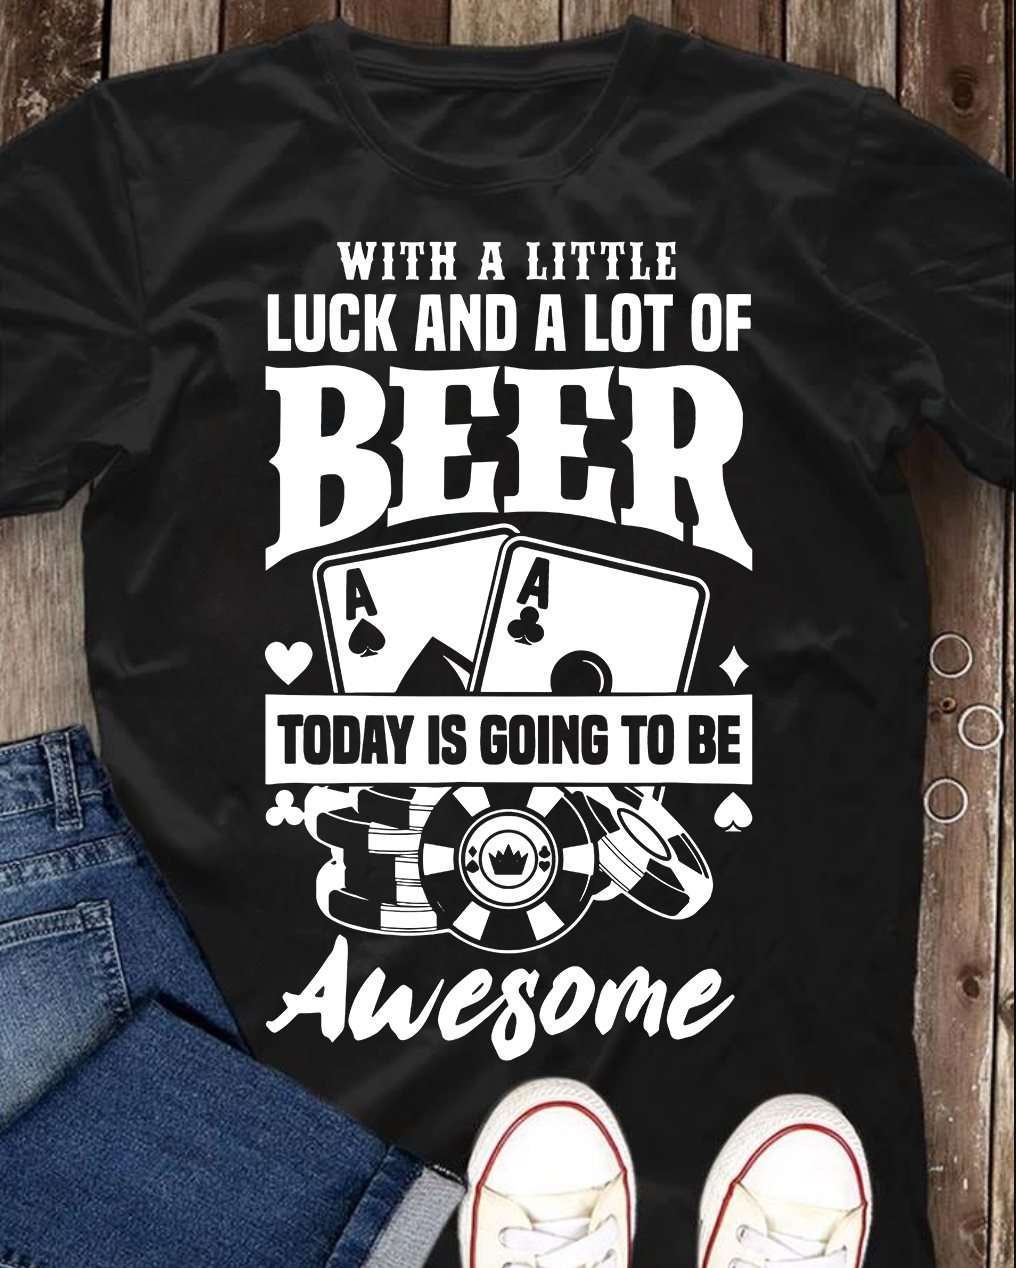 With a little luck and a lot of beer today is going to be awesome - Gambling and drinking beer